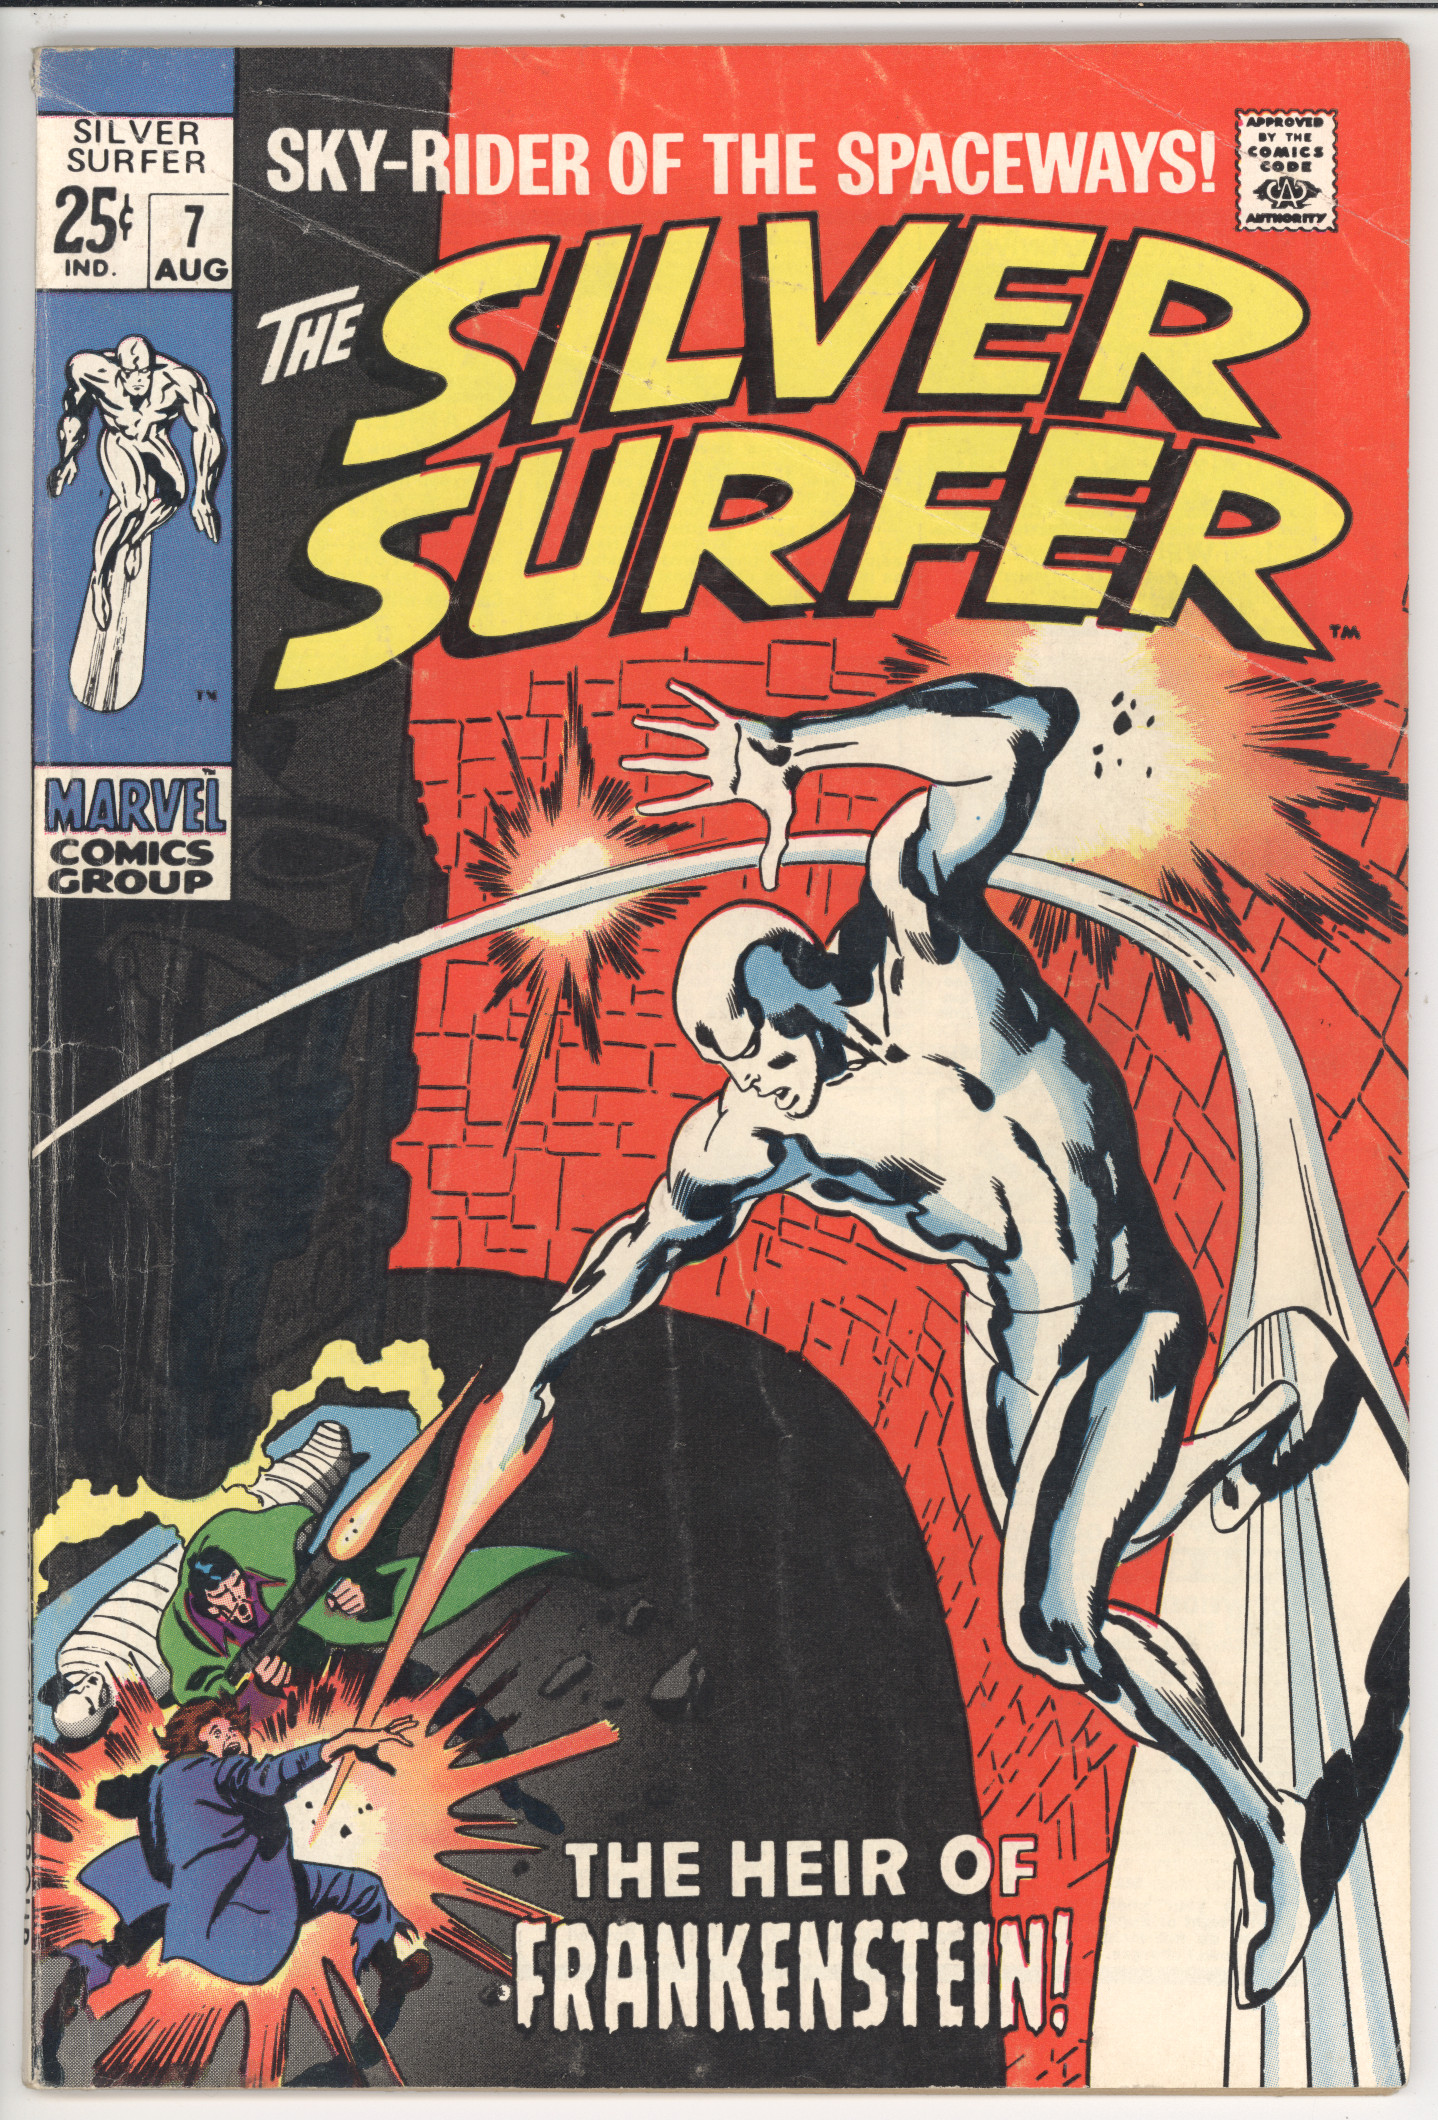 Silver Surfer #7 front